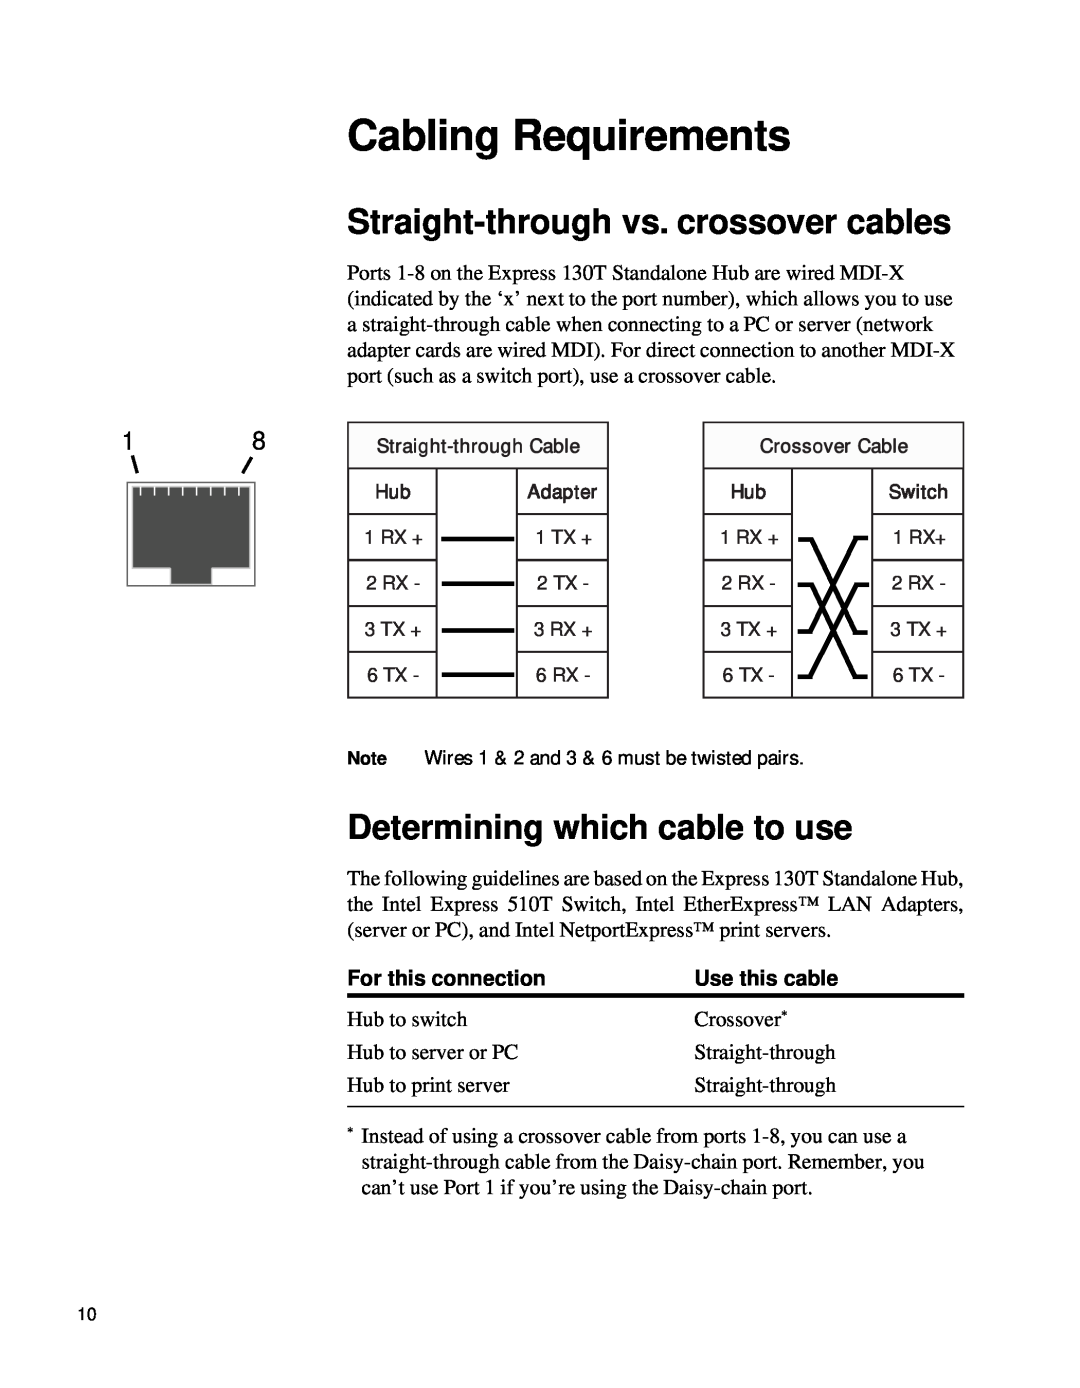 Intel 130T Cabling Requirements, Straight-through vs. crossover cables, Determining which cable to use, Use this cable 